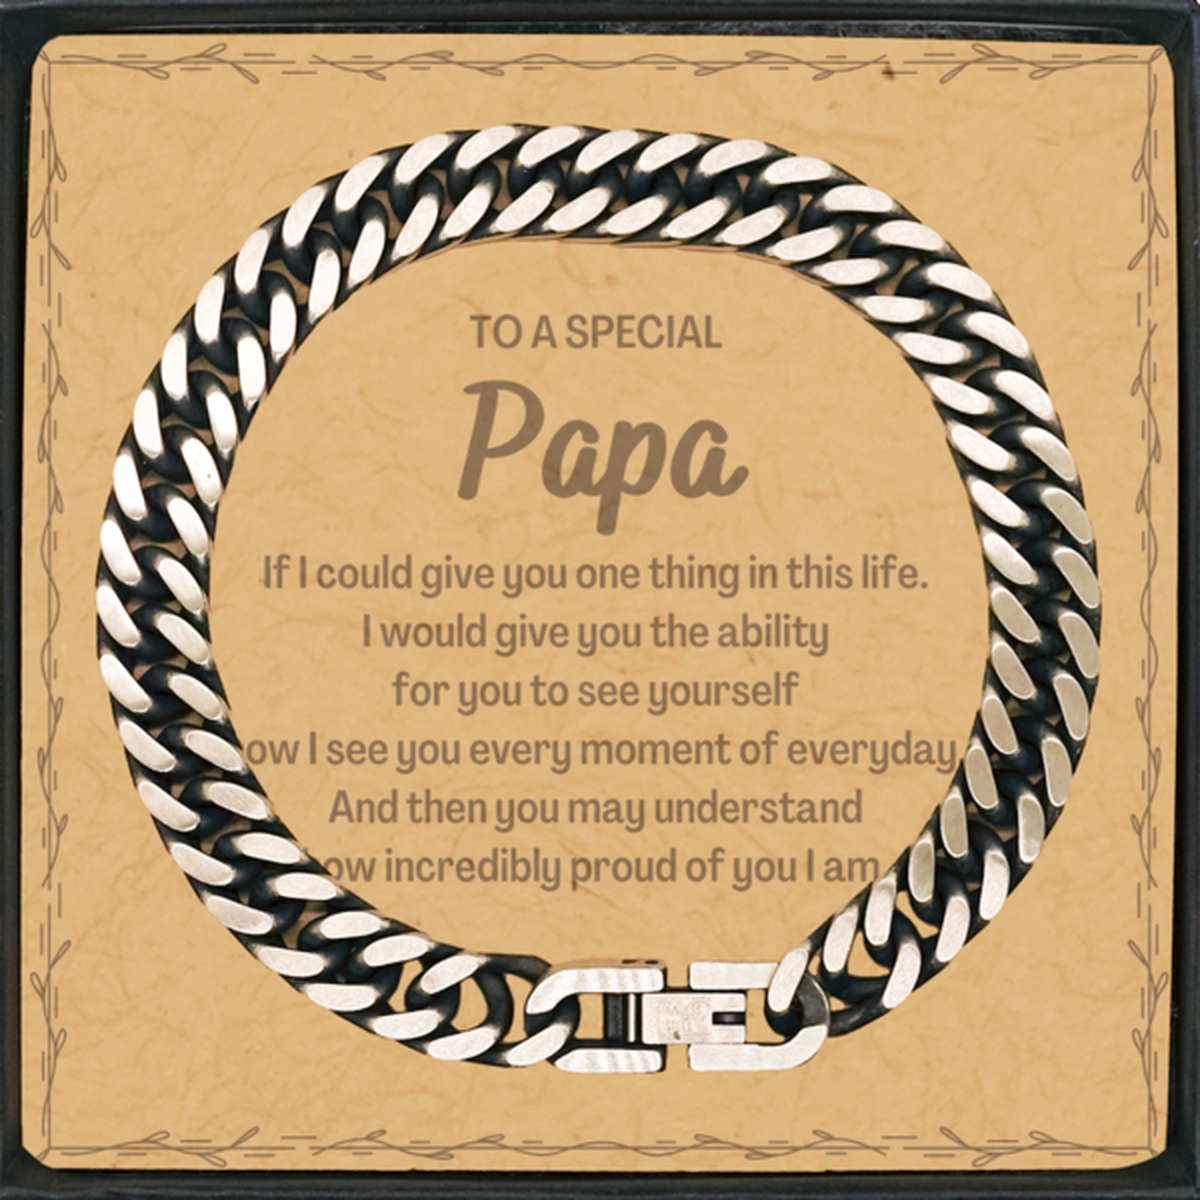 To My Papa Cuban Link Chain Bracelet, Gifts For Papa Message Card, Inspirational Gifts for Christmas Birthday, Epic Gifts for Papa To A Special Papa how incredibly proud of you I am